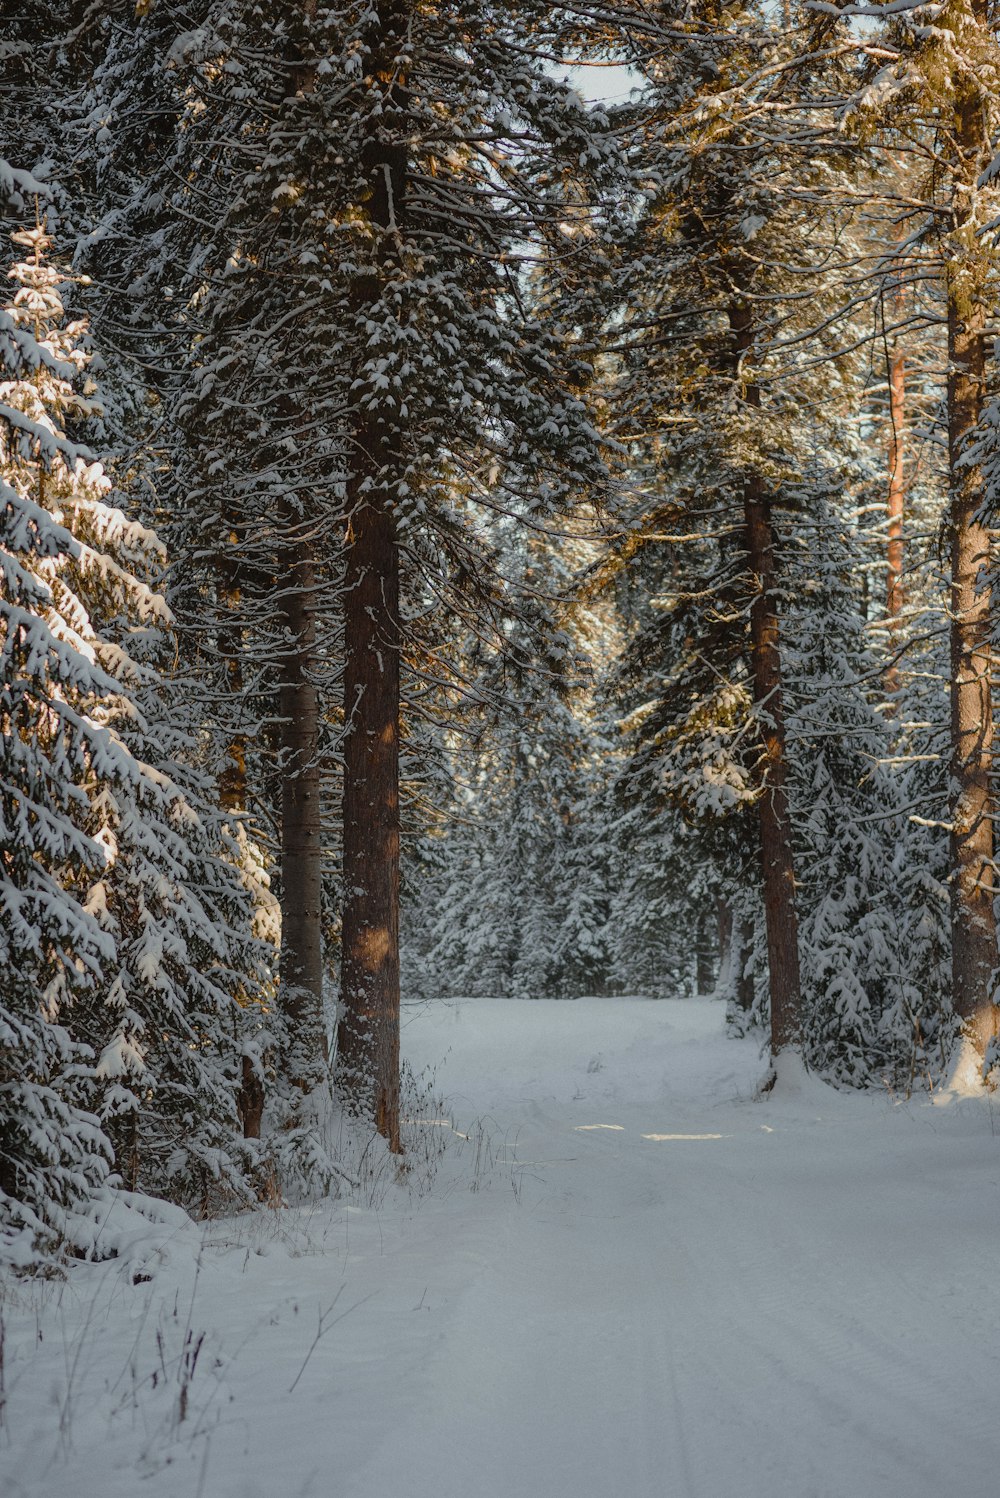 a path through a snowy forest with lots of trees